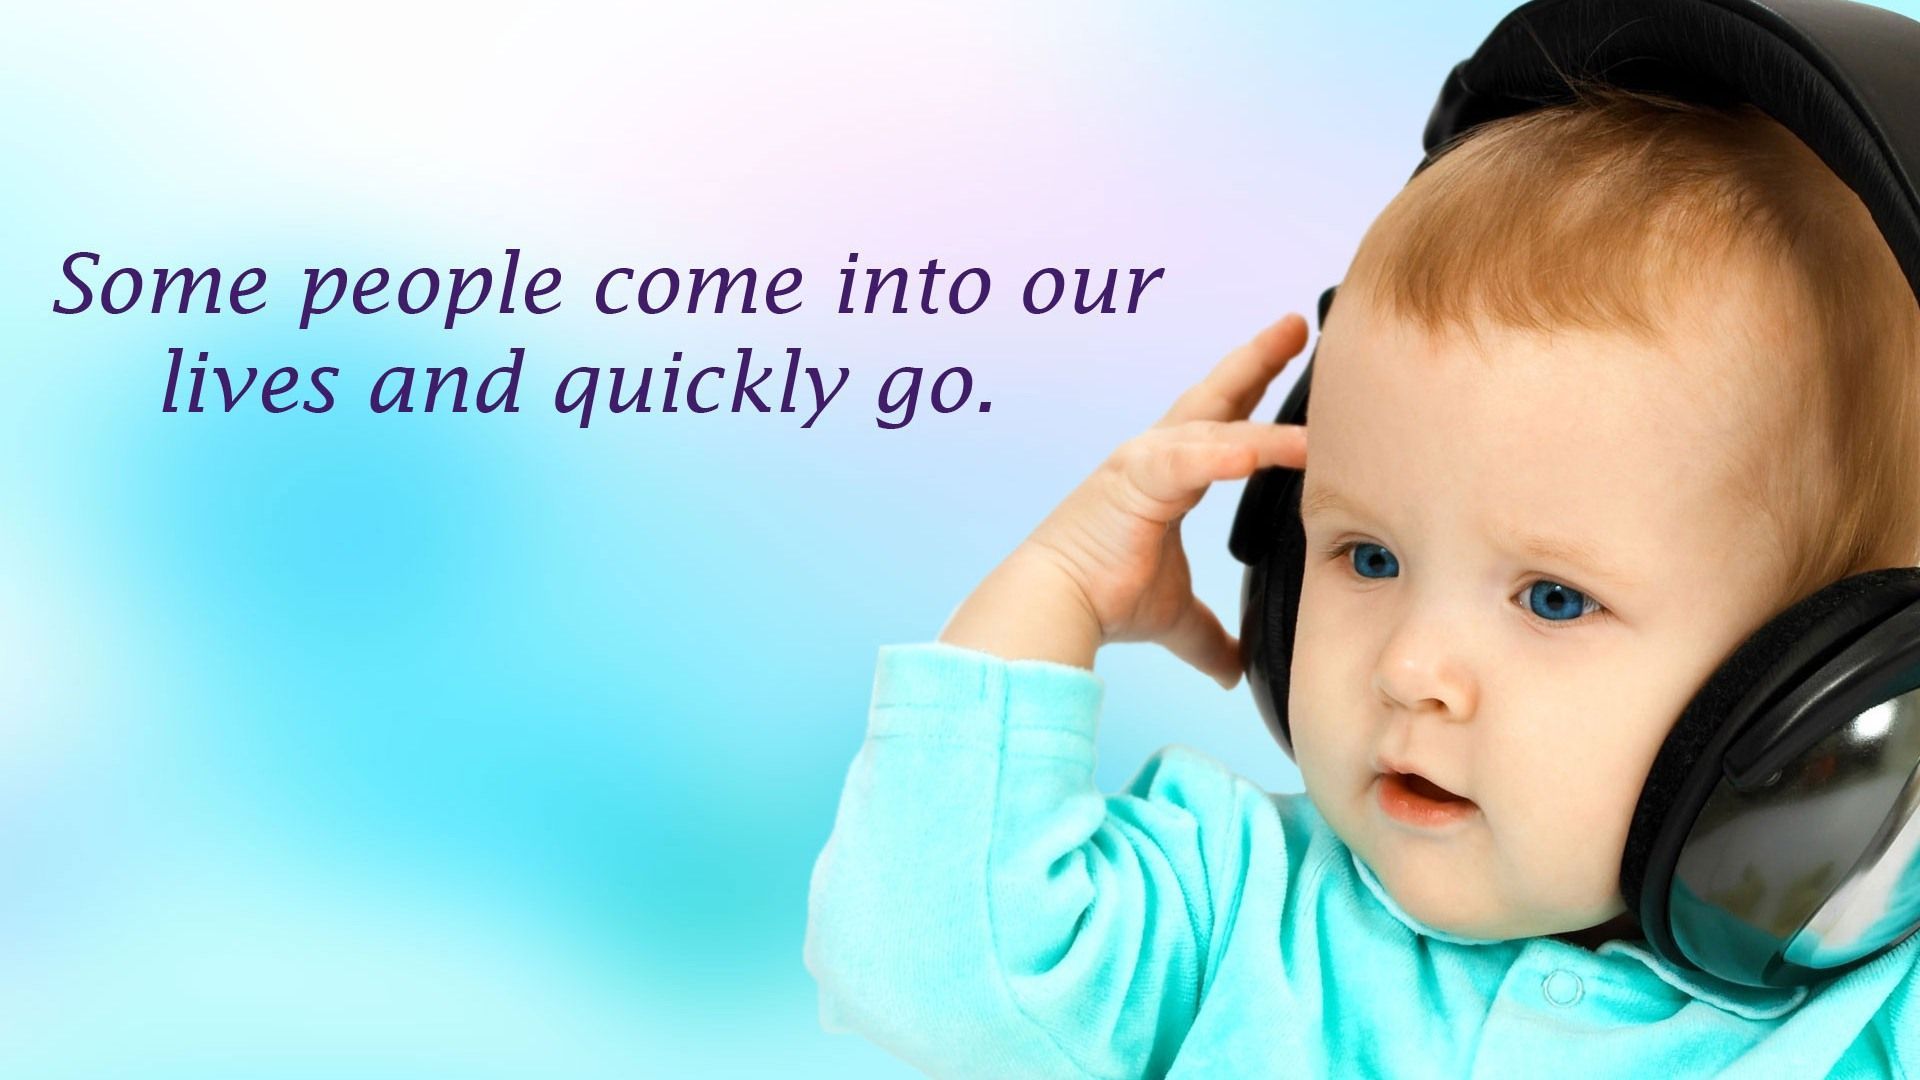 Friendship Quotes HD Image. HD Wallpaper Image. Cute baby